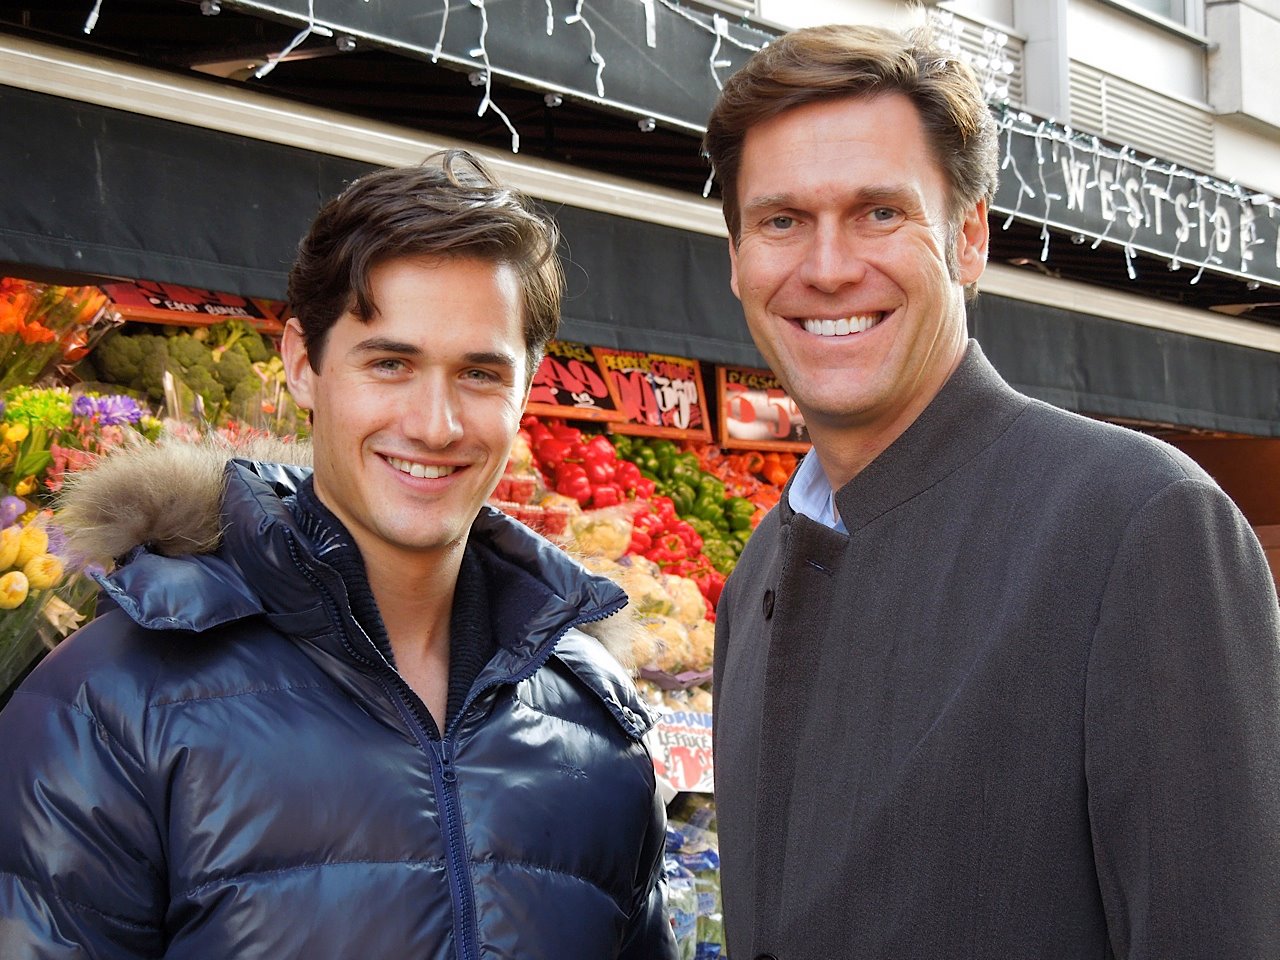 Charlie Siem and CBS News National Correspondent Lee Cowan in December 2011. Click to watch the video!